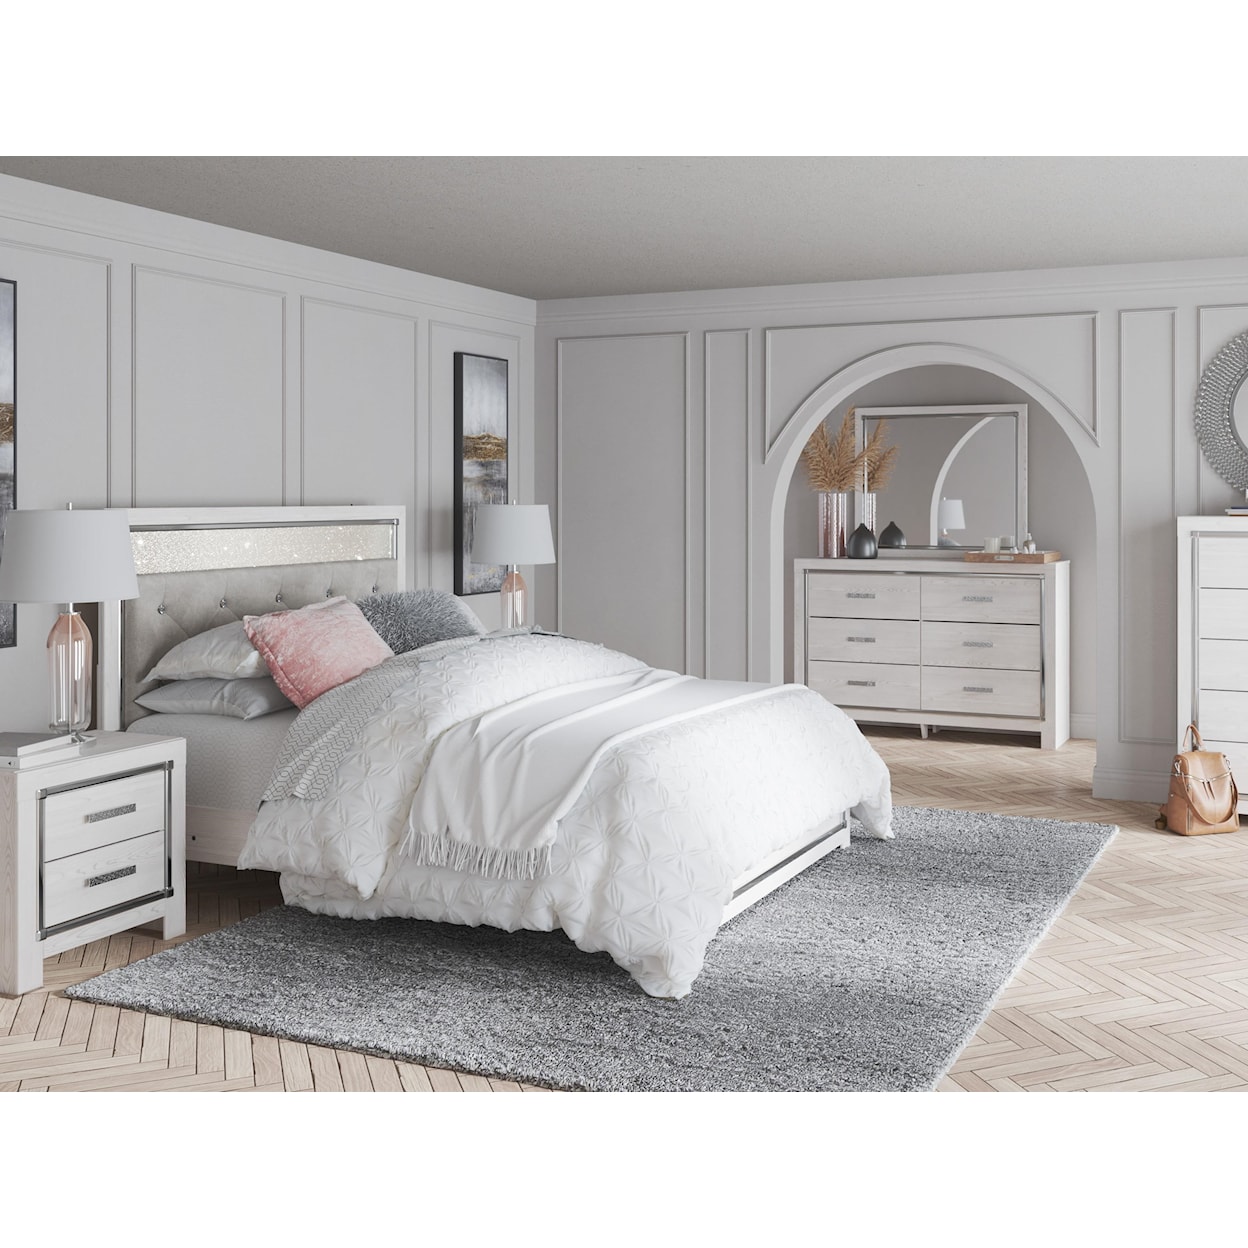 Signature Design by Ashley Altyra King 5 Pc Bedroom Group